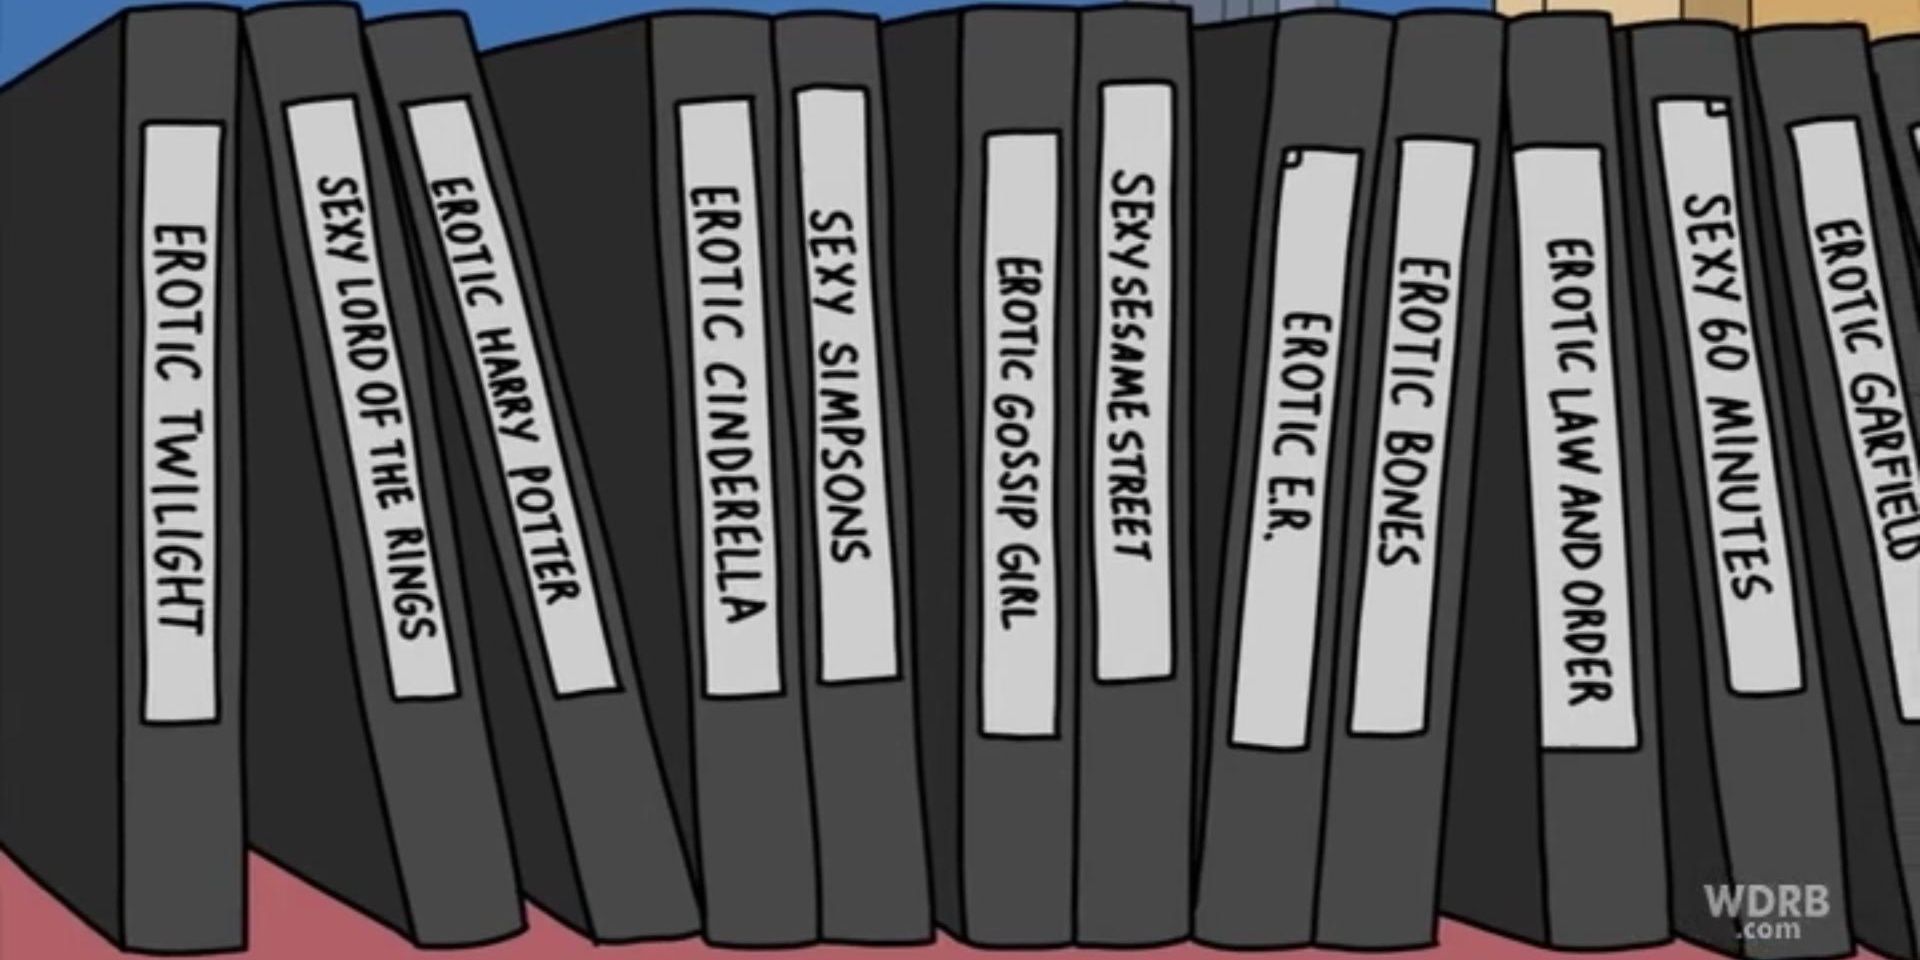 Tina Belcher's Erotic Fan Fiction Collection.